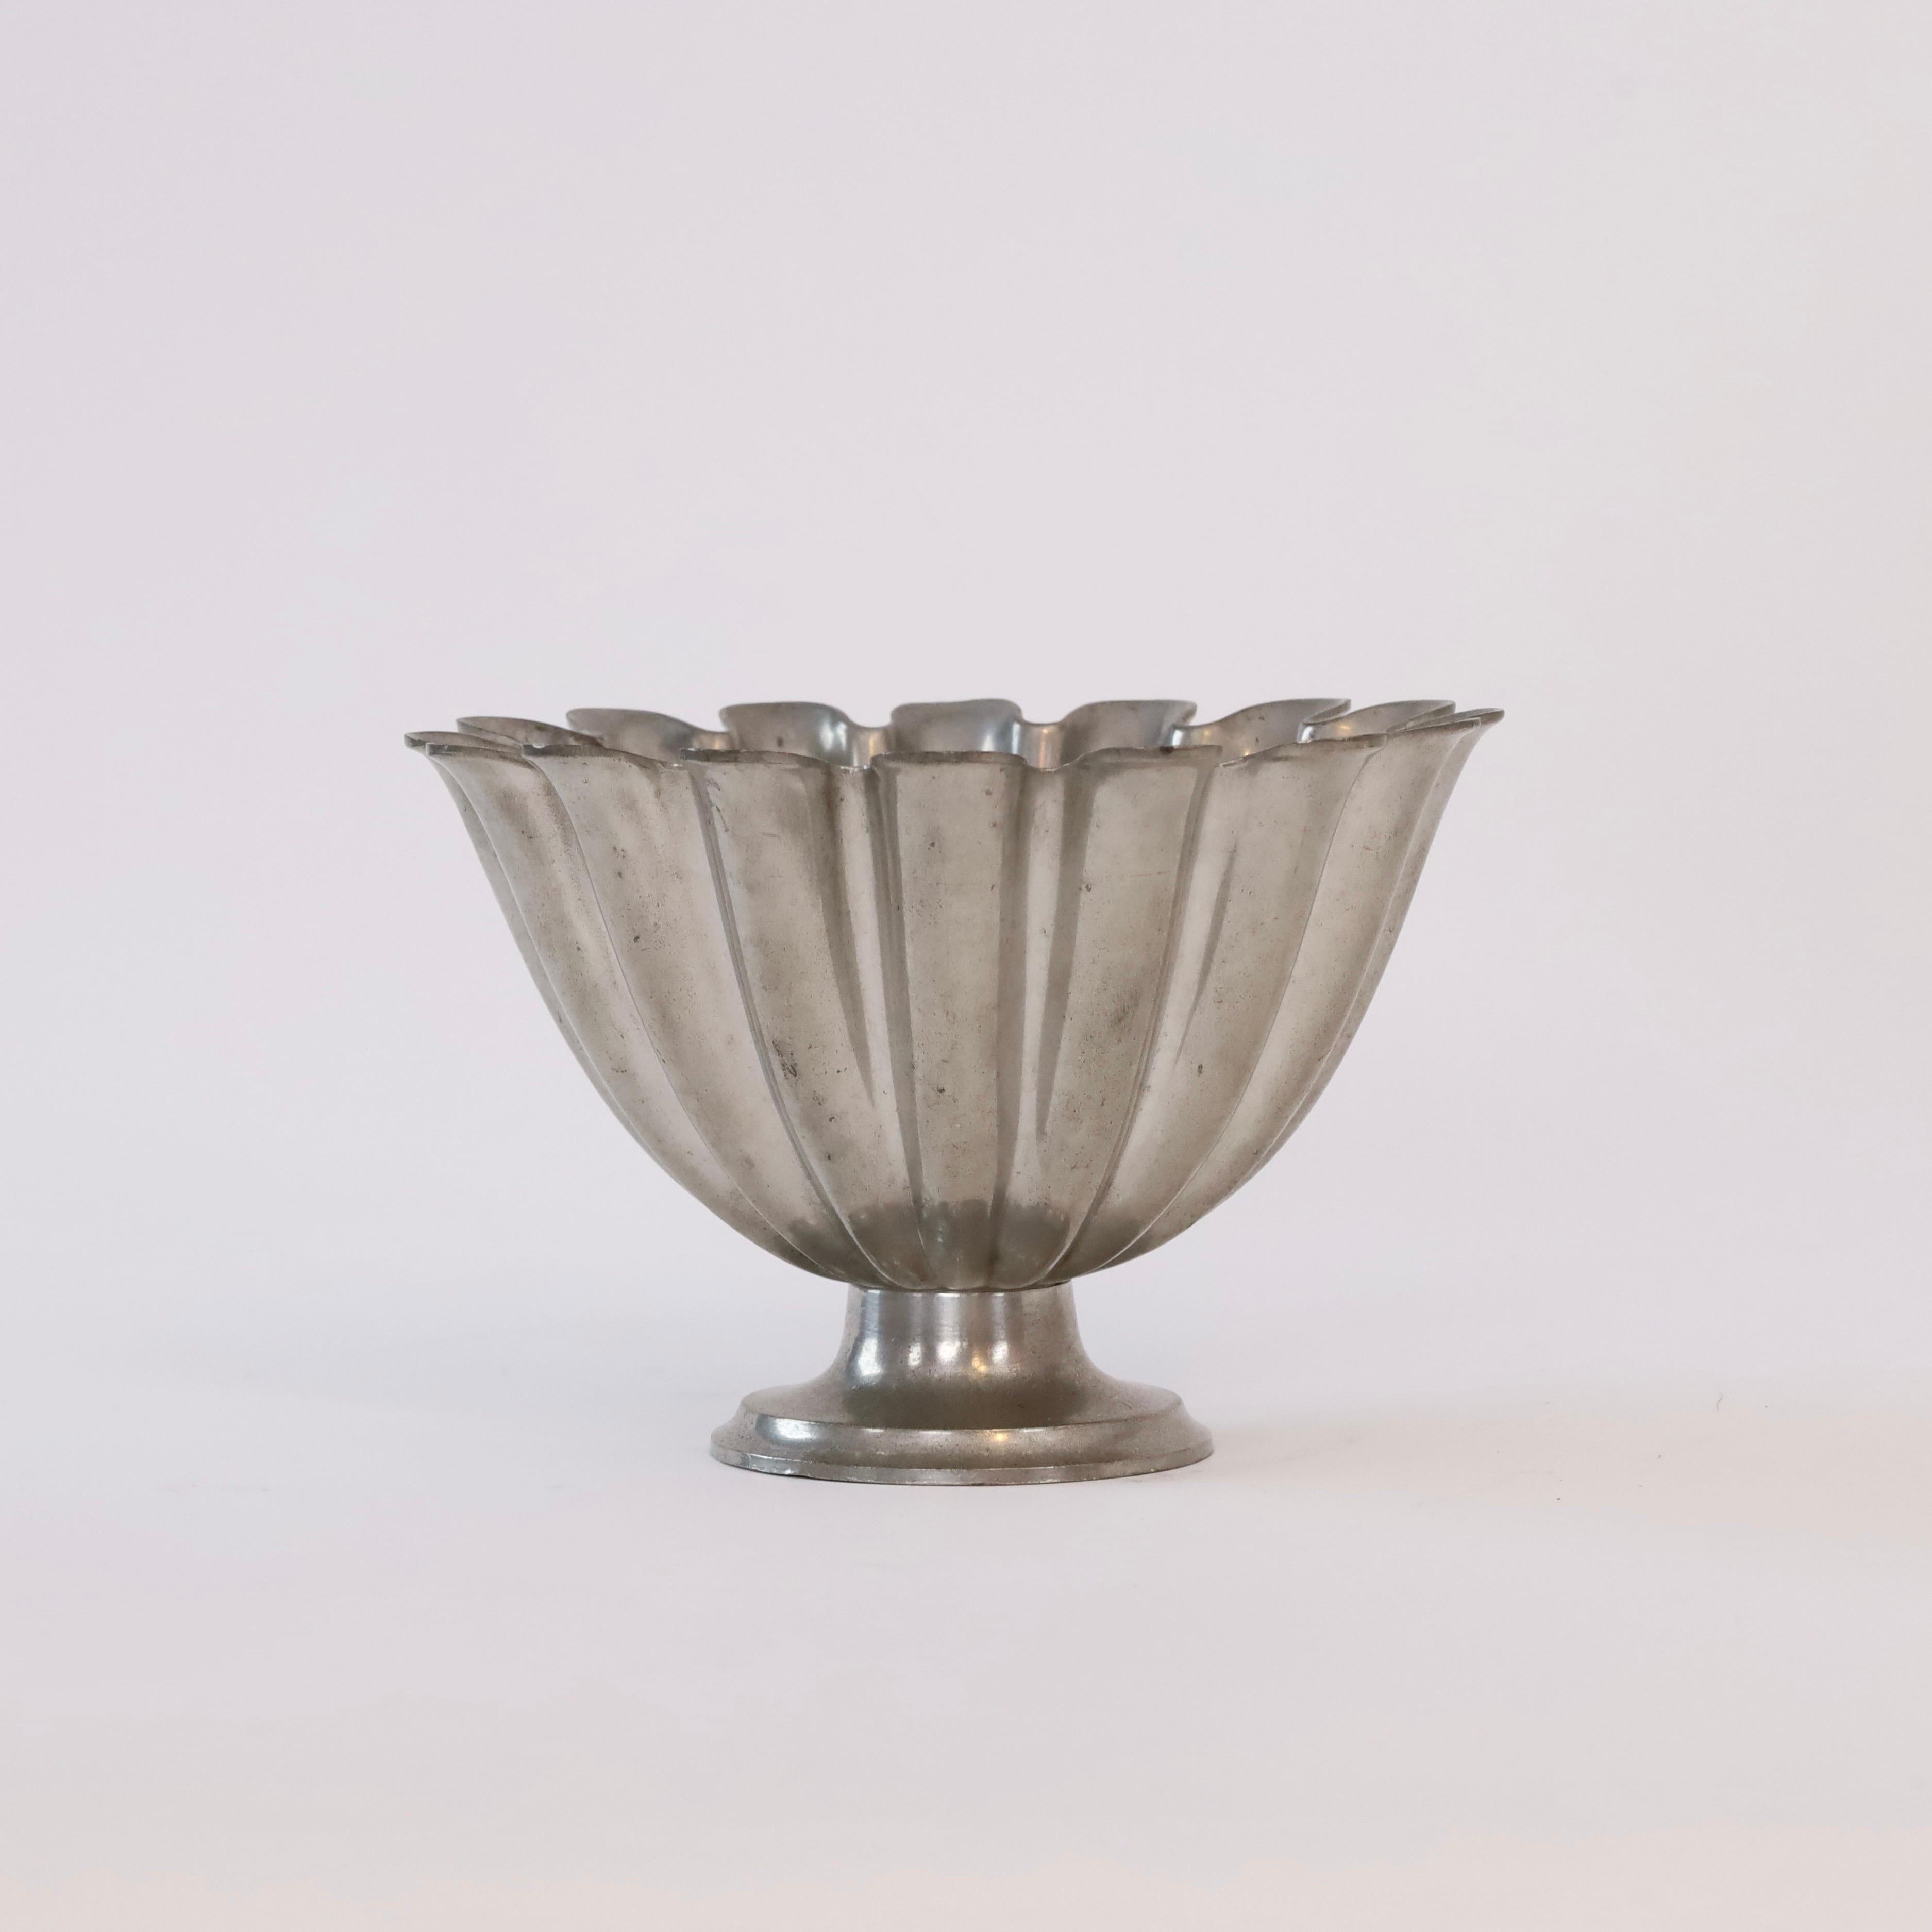 Scalloped pedestal pewter bowl by Just Andersen 1920s, Denmark For Sale 5